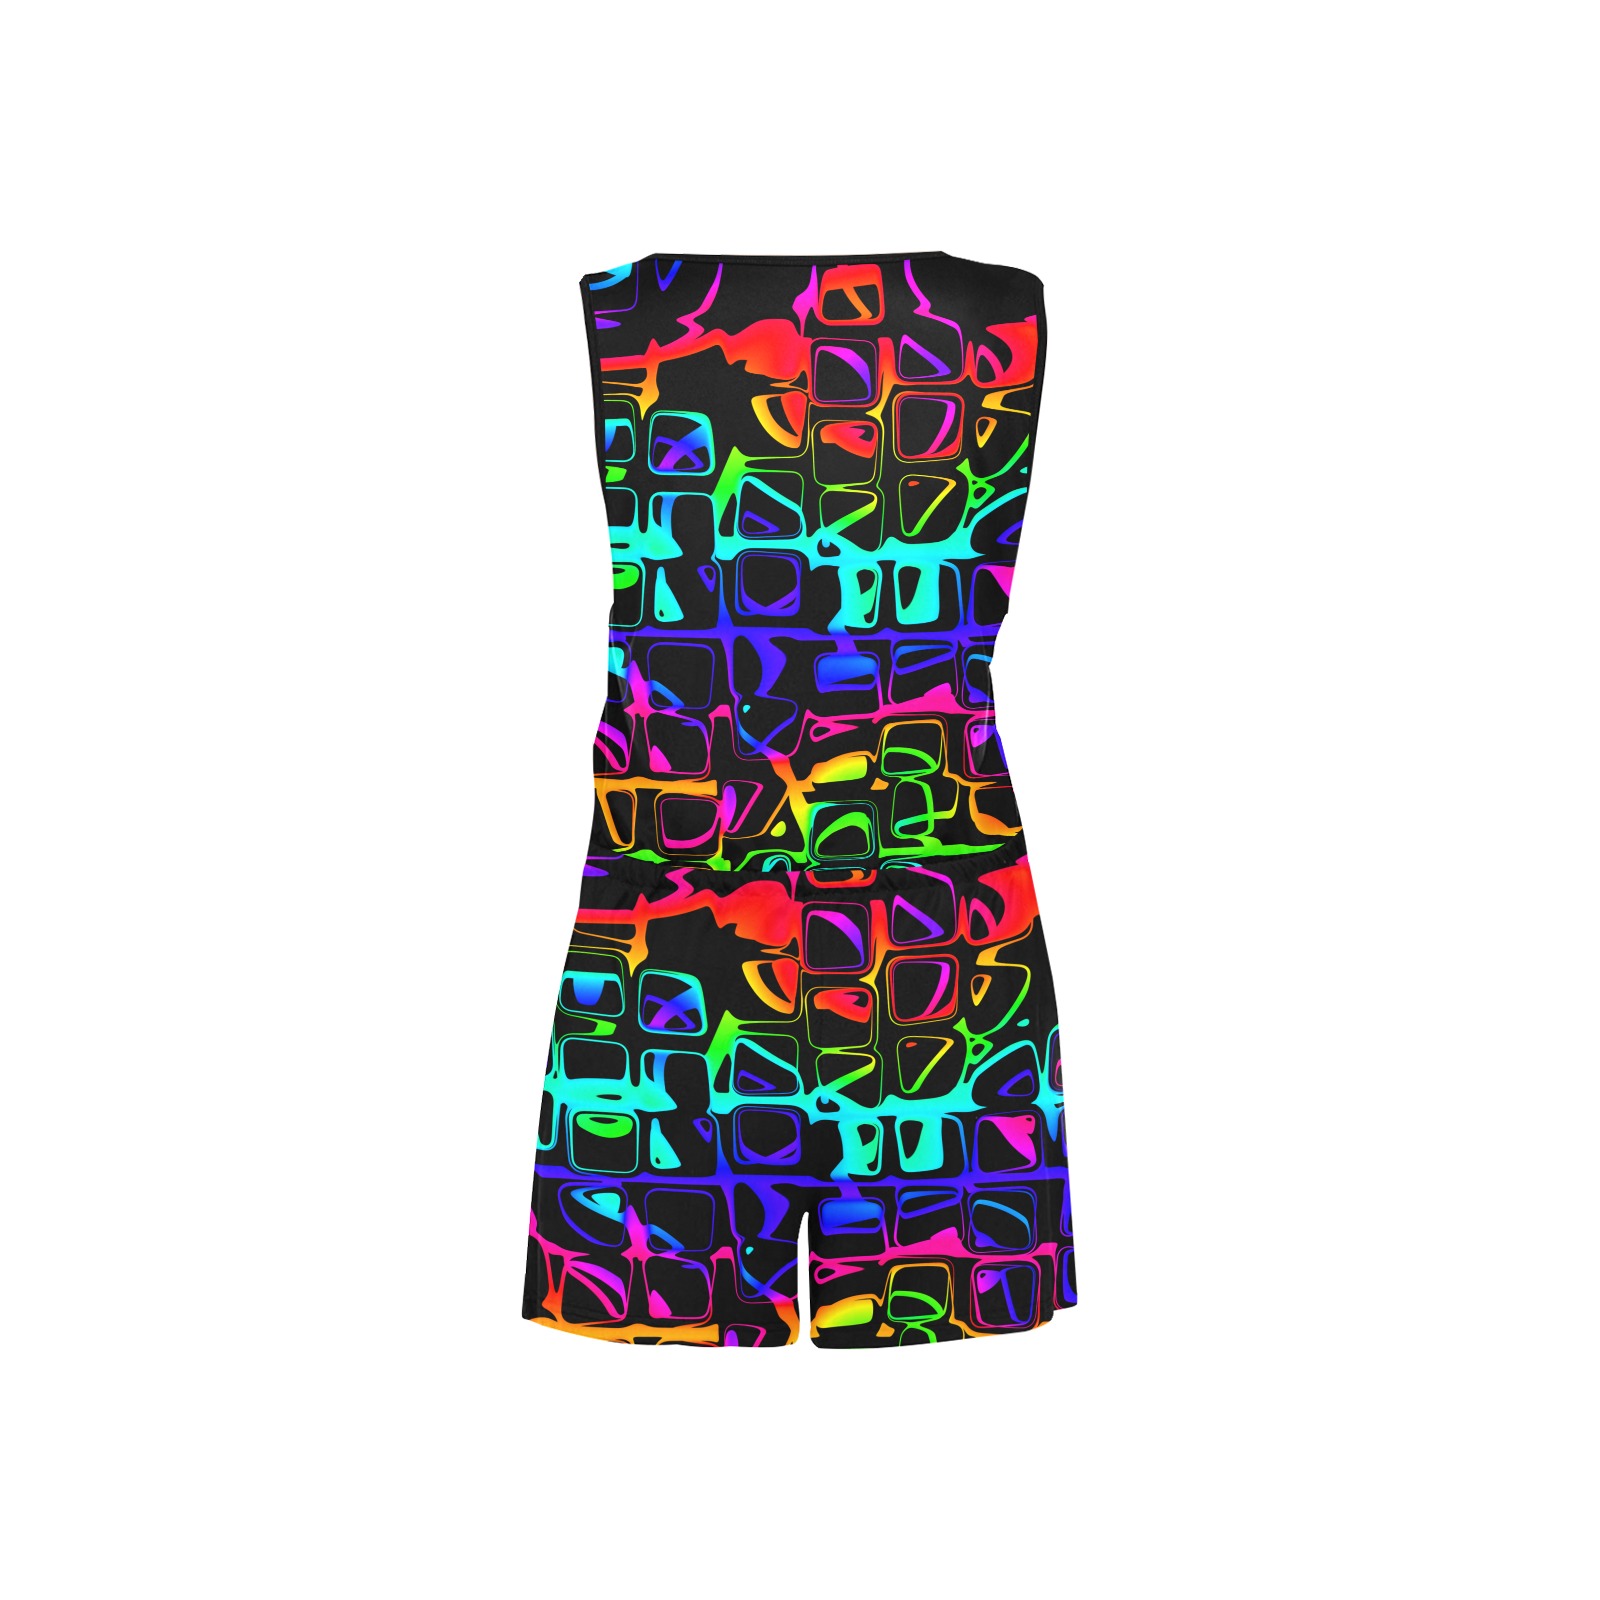 Neon 1 All Over Print Short Jumpsuit